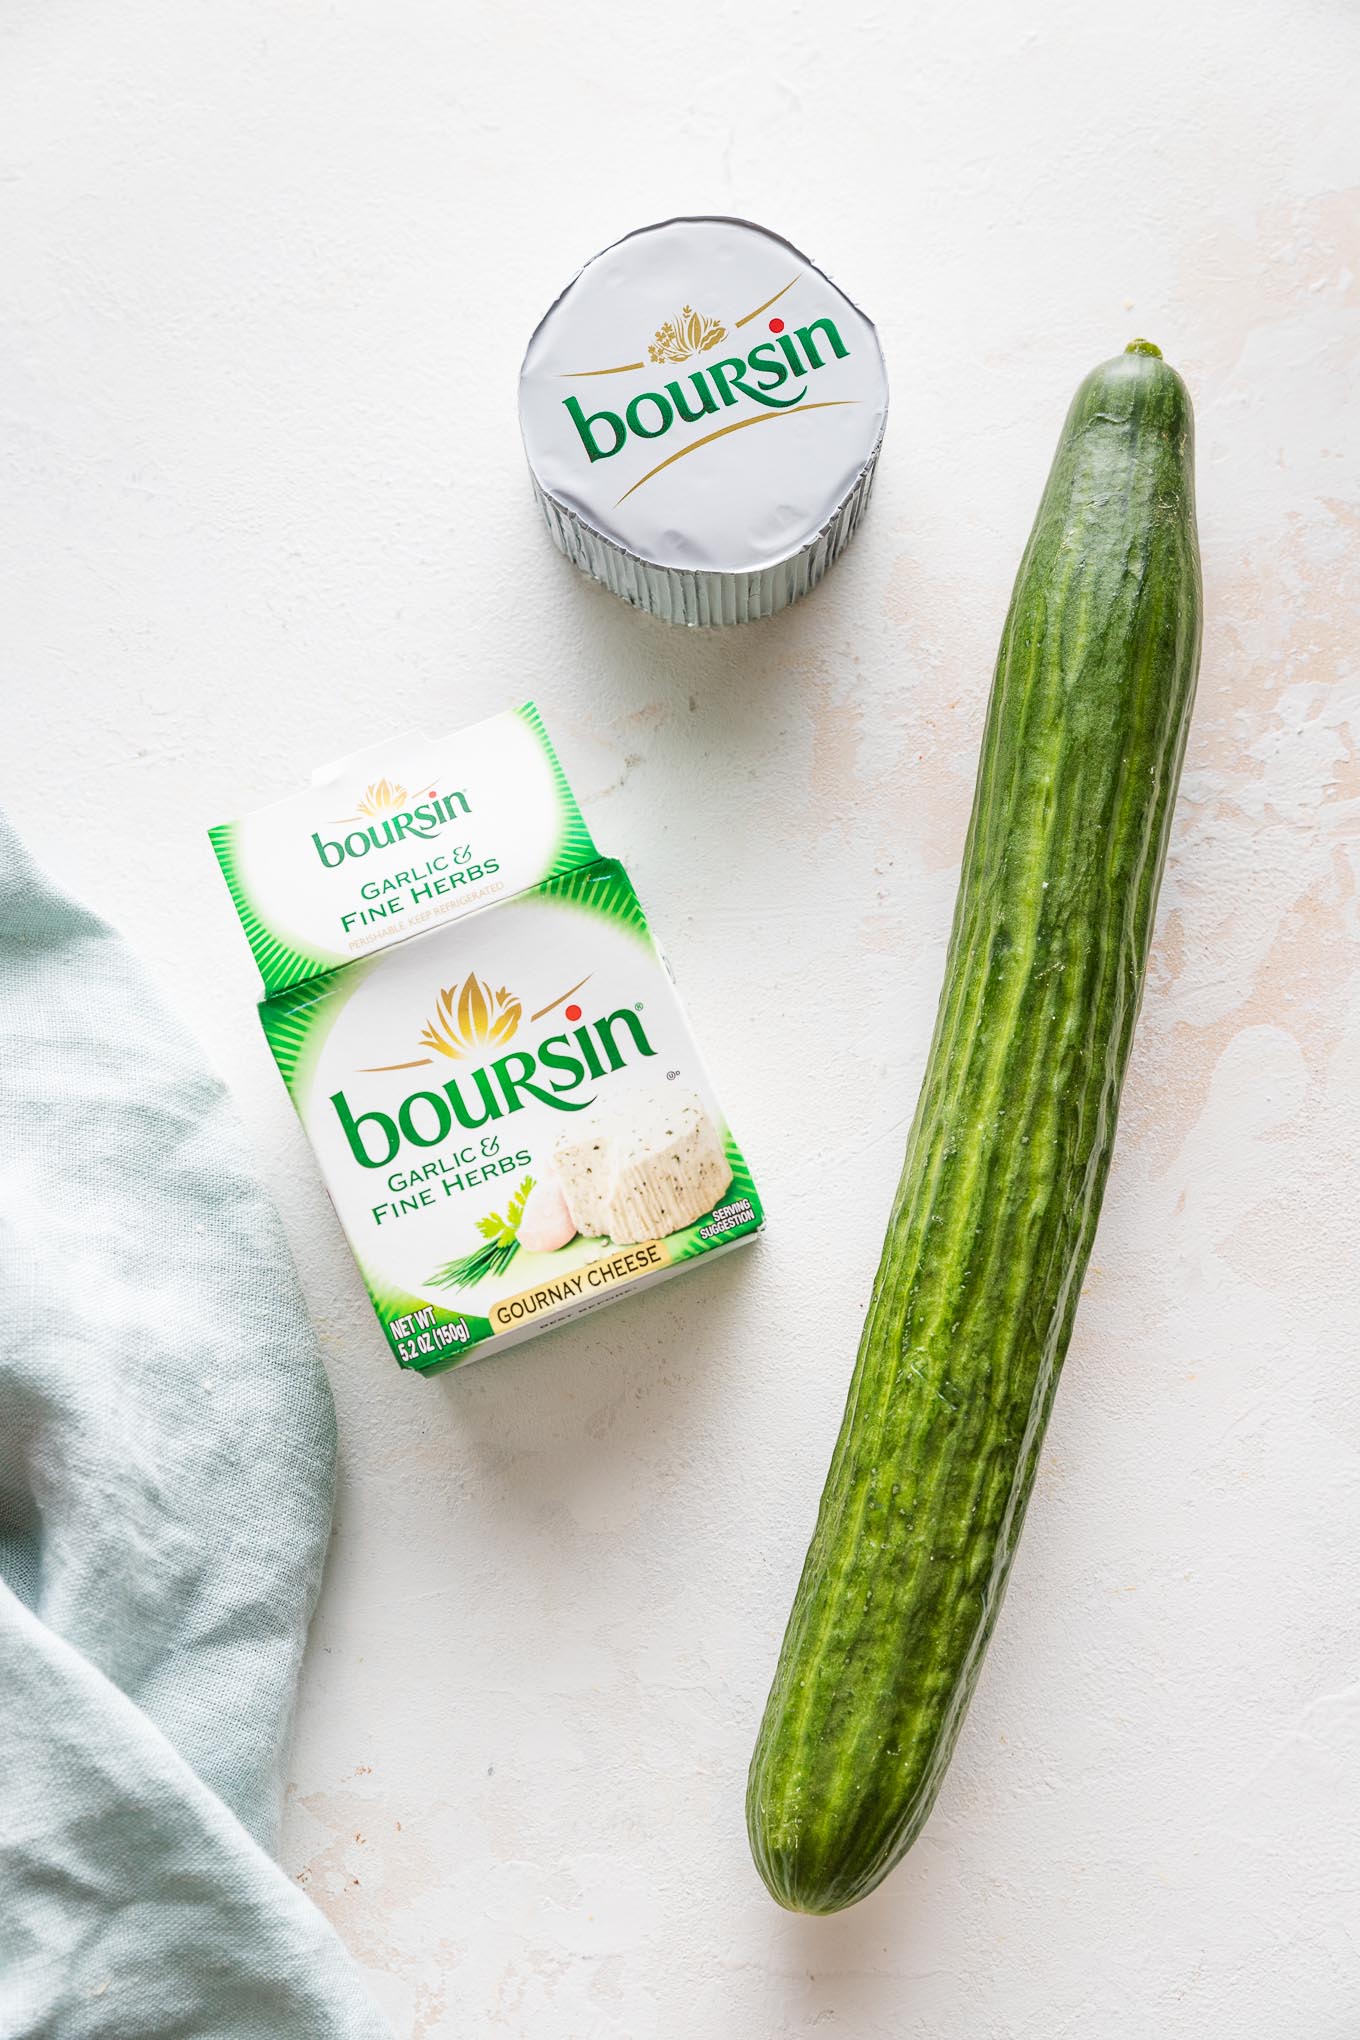 An English cucumber and a package of garlic herb Boursin cheese.